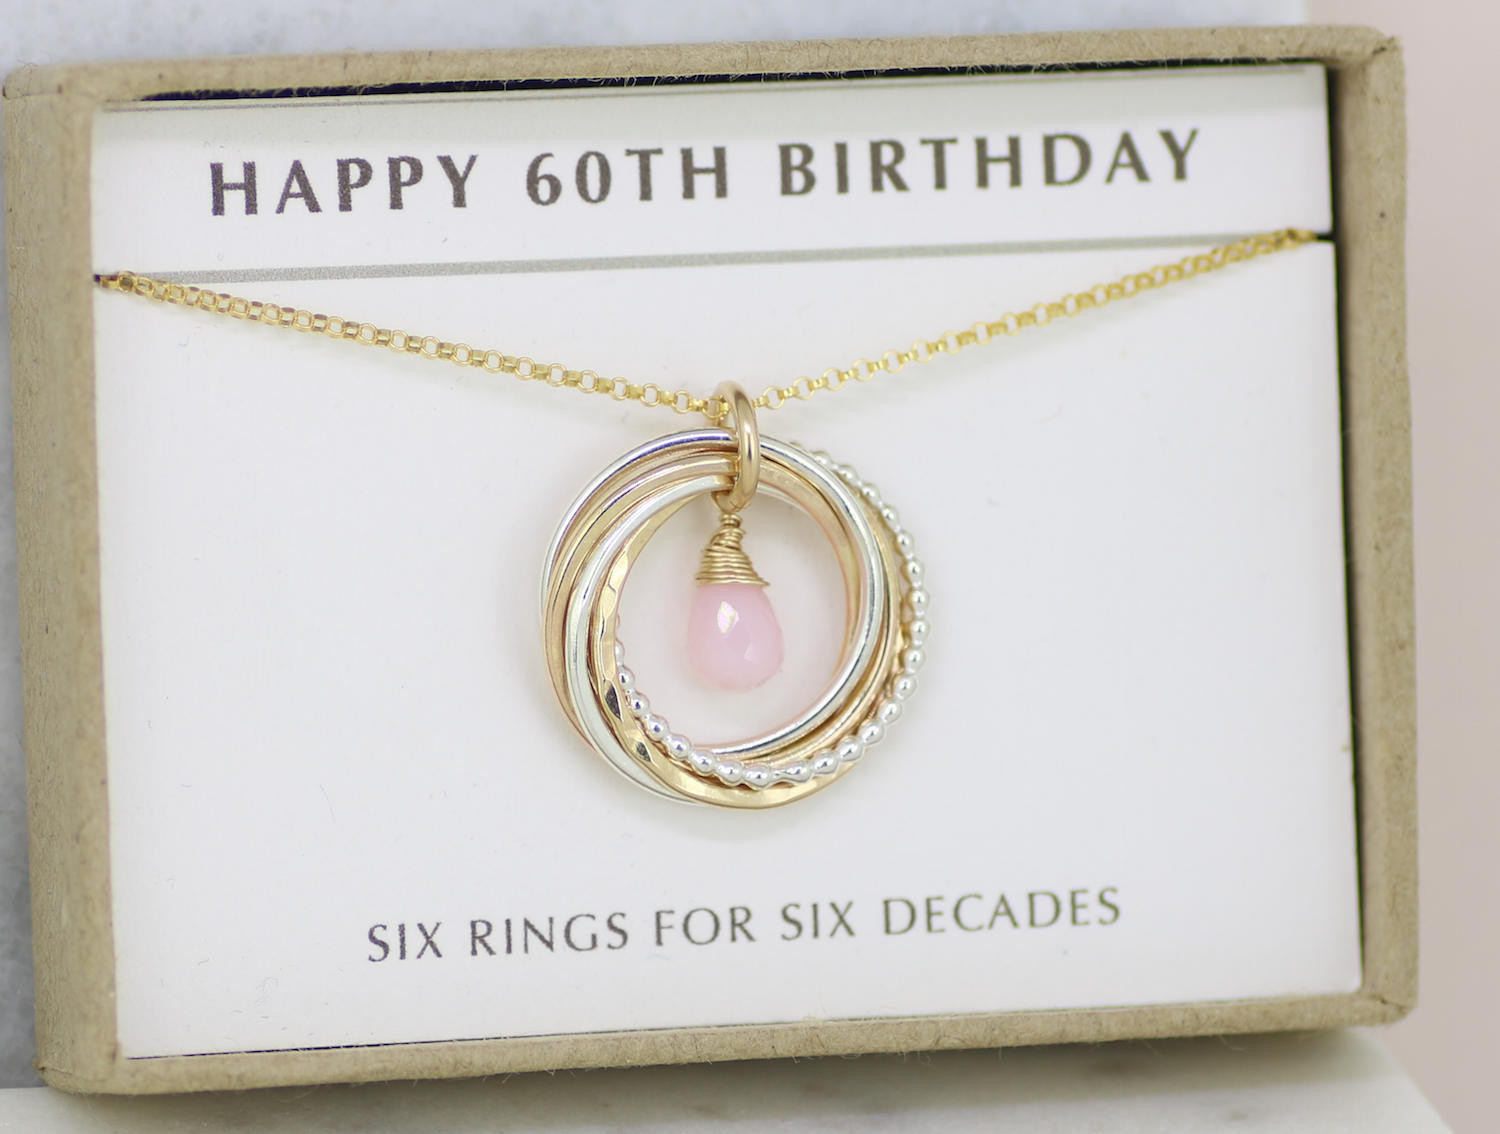 60Th Birthday Gift Ideas For.Women
 60th birthday ts for women pink opal necklace for October